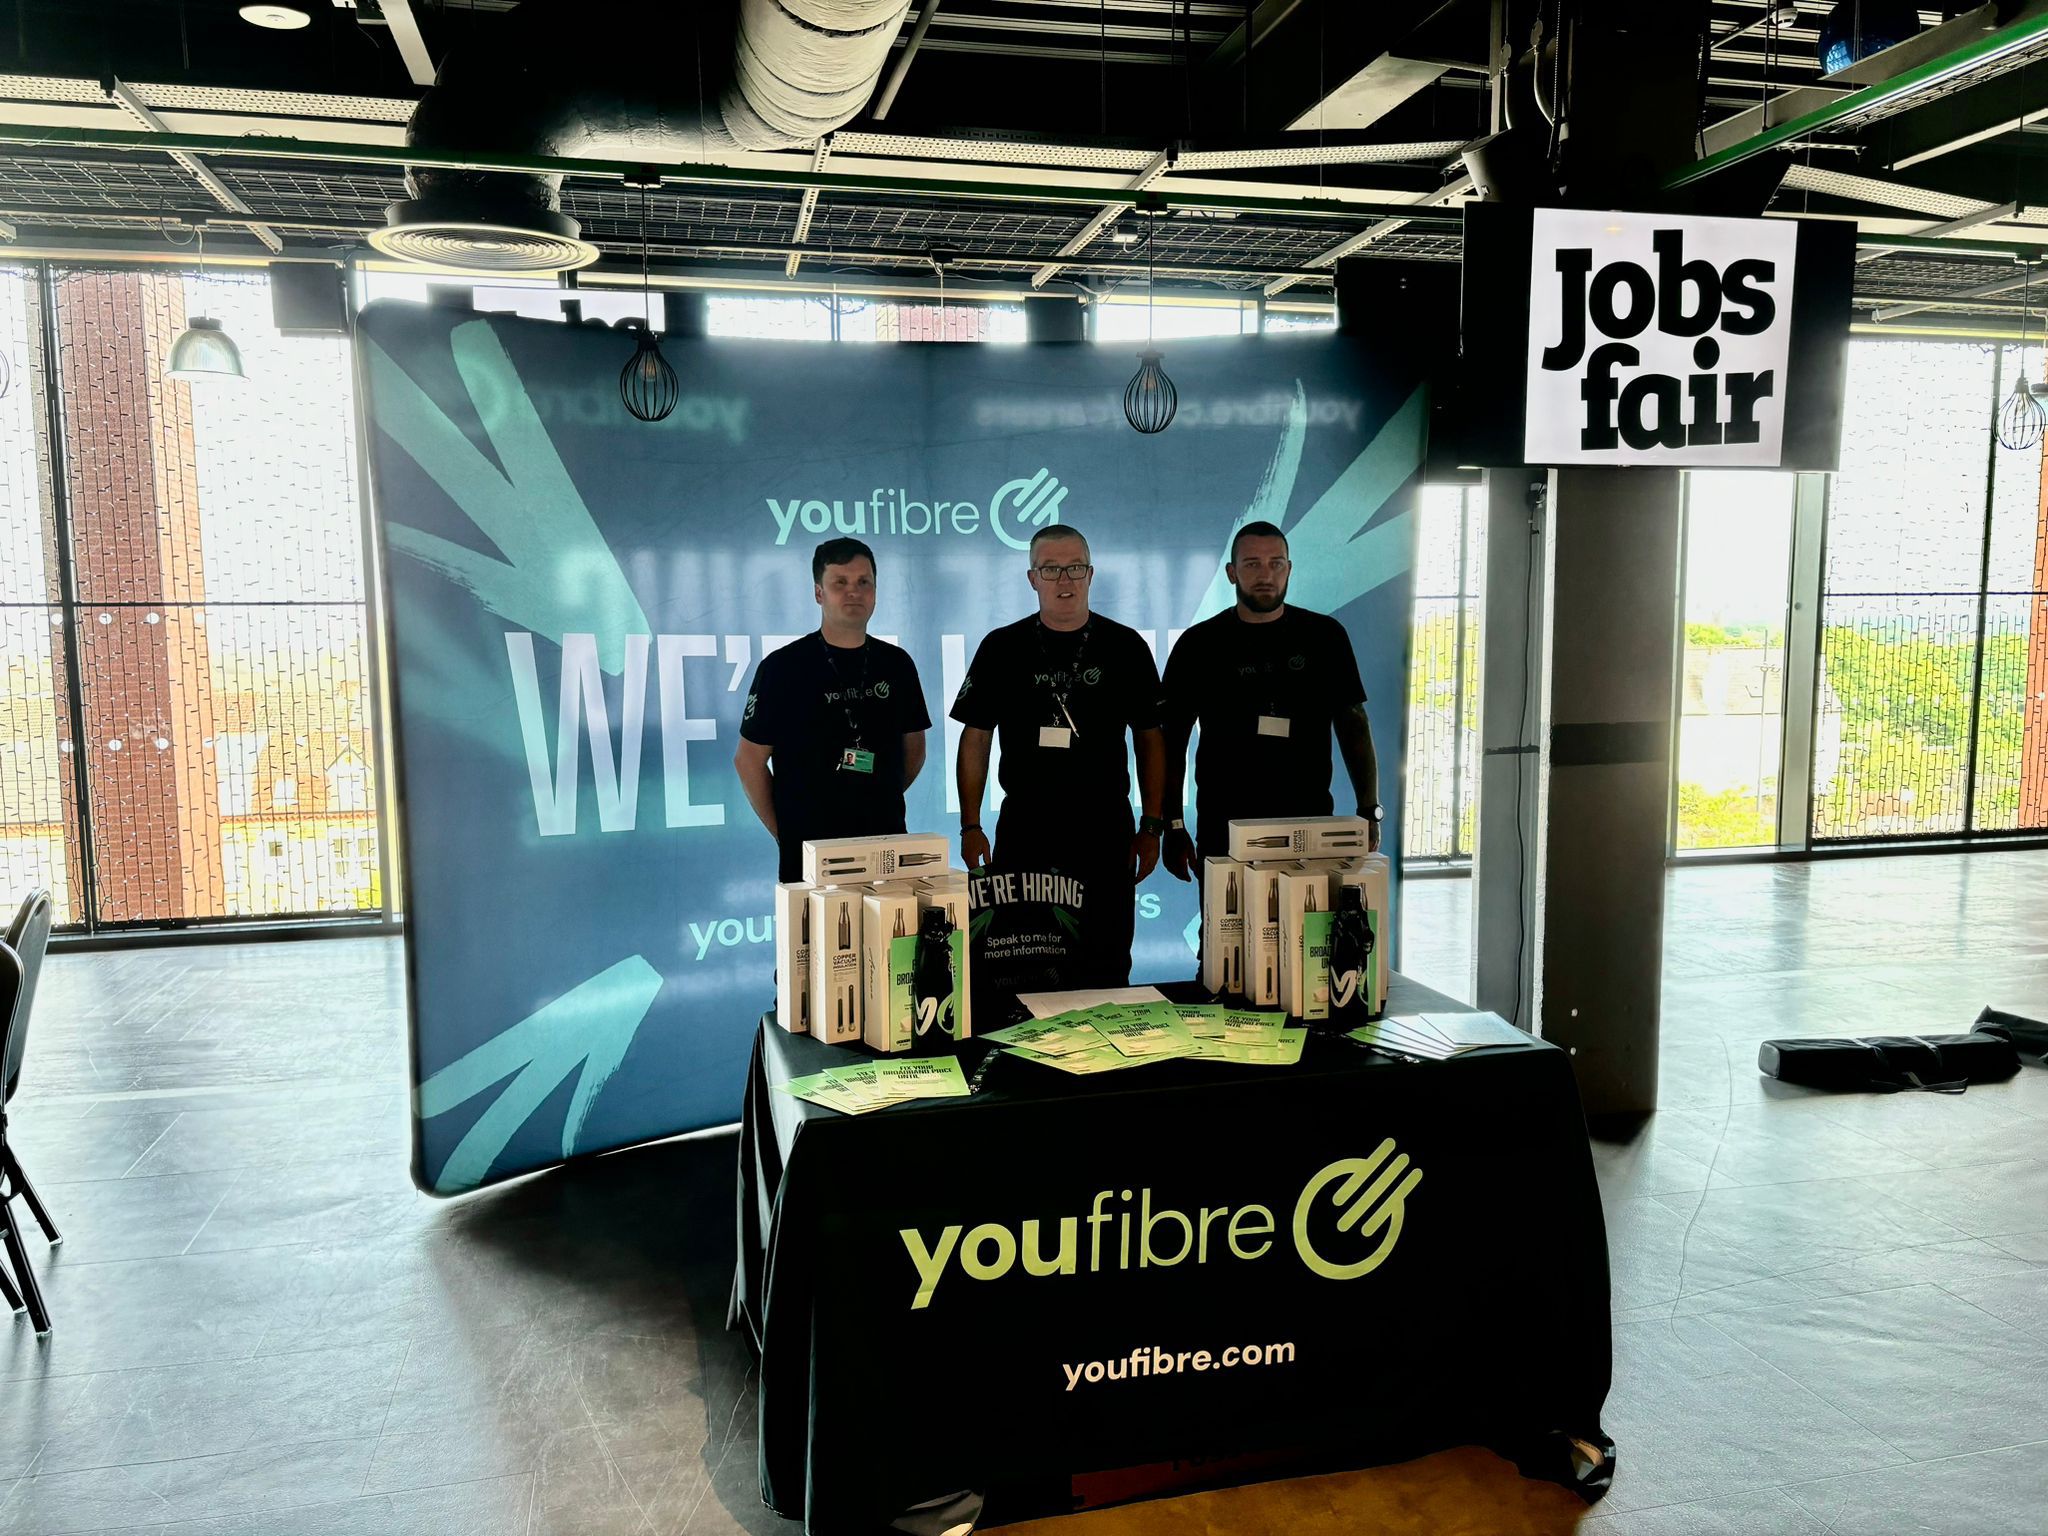 YouFibre at our event in Liverpool